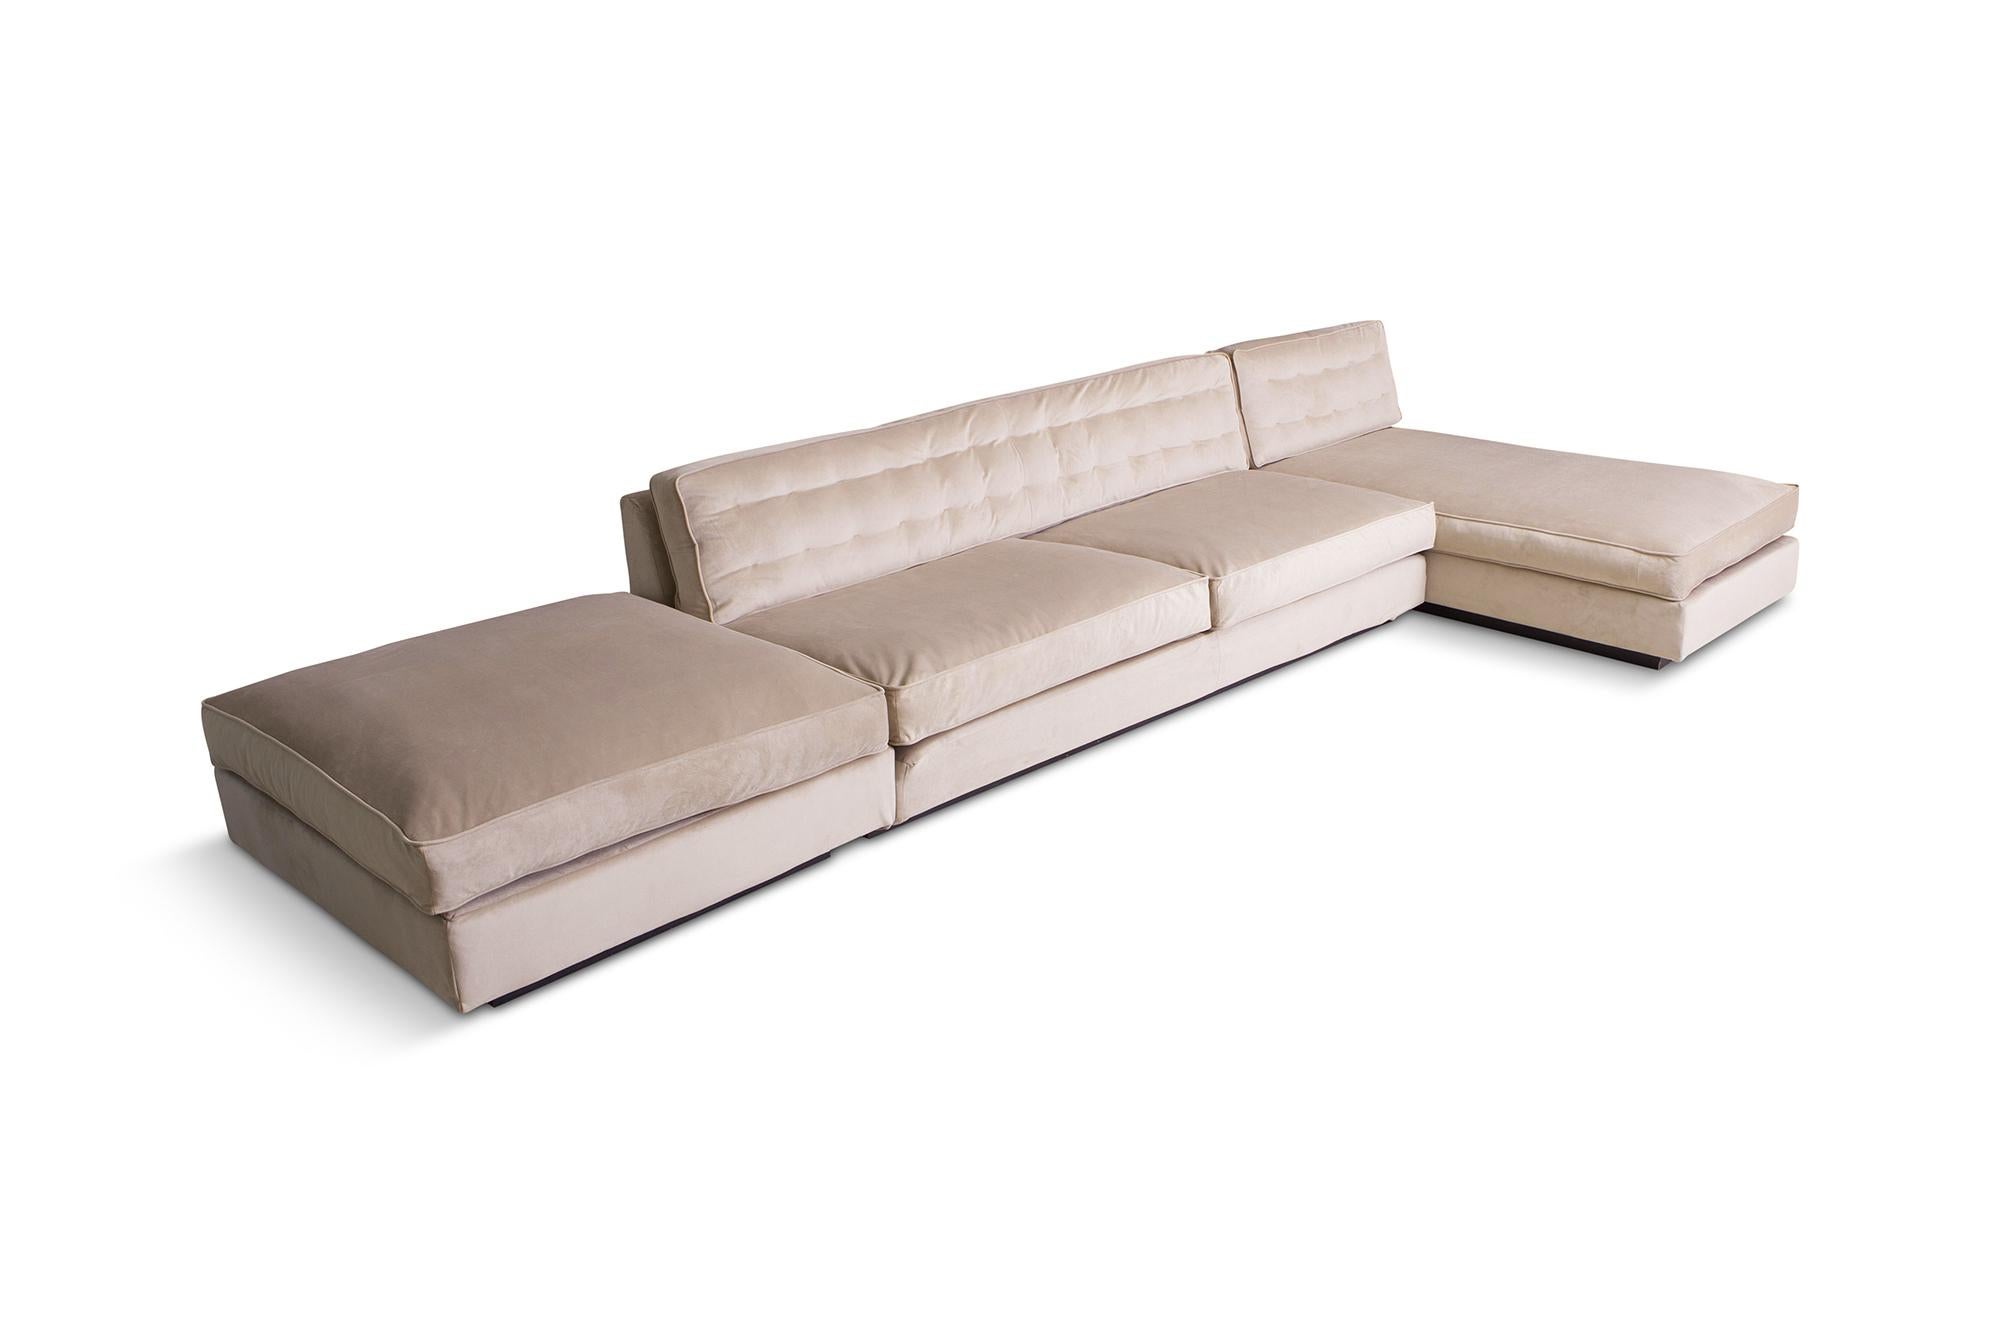 Antonello Mosca for the Royal series, Giorgetti, Italy 

in nude velvet upholstery. The Royal series is a modular made-to-measure system, allowing everyone to create his or her own “conversation” area. Therefore every sofa is unique! 

This sofa